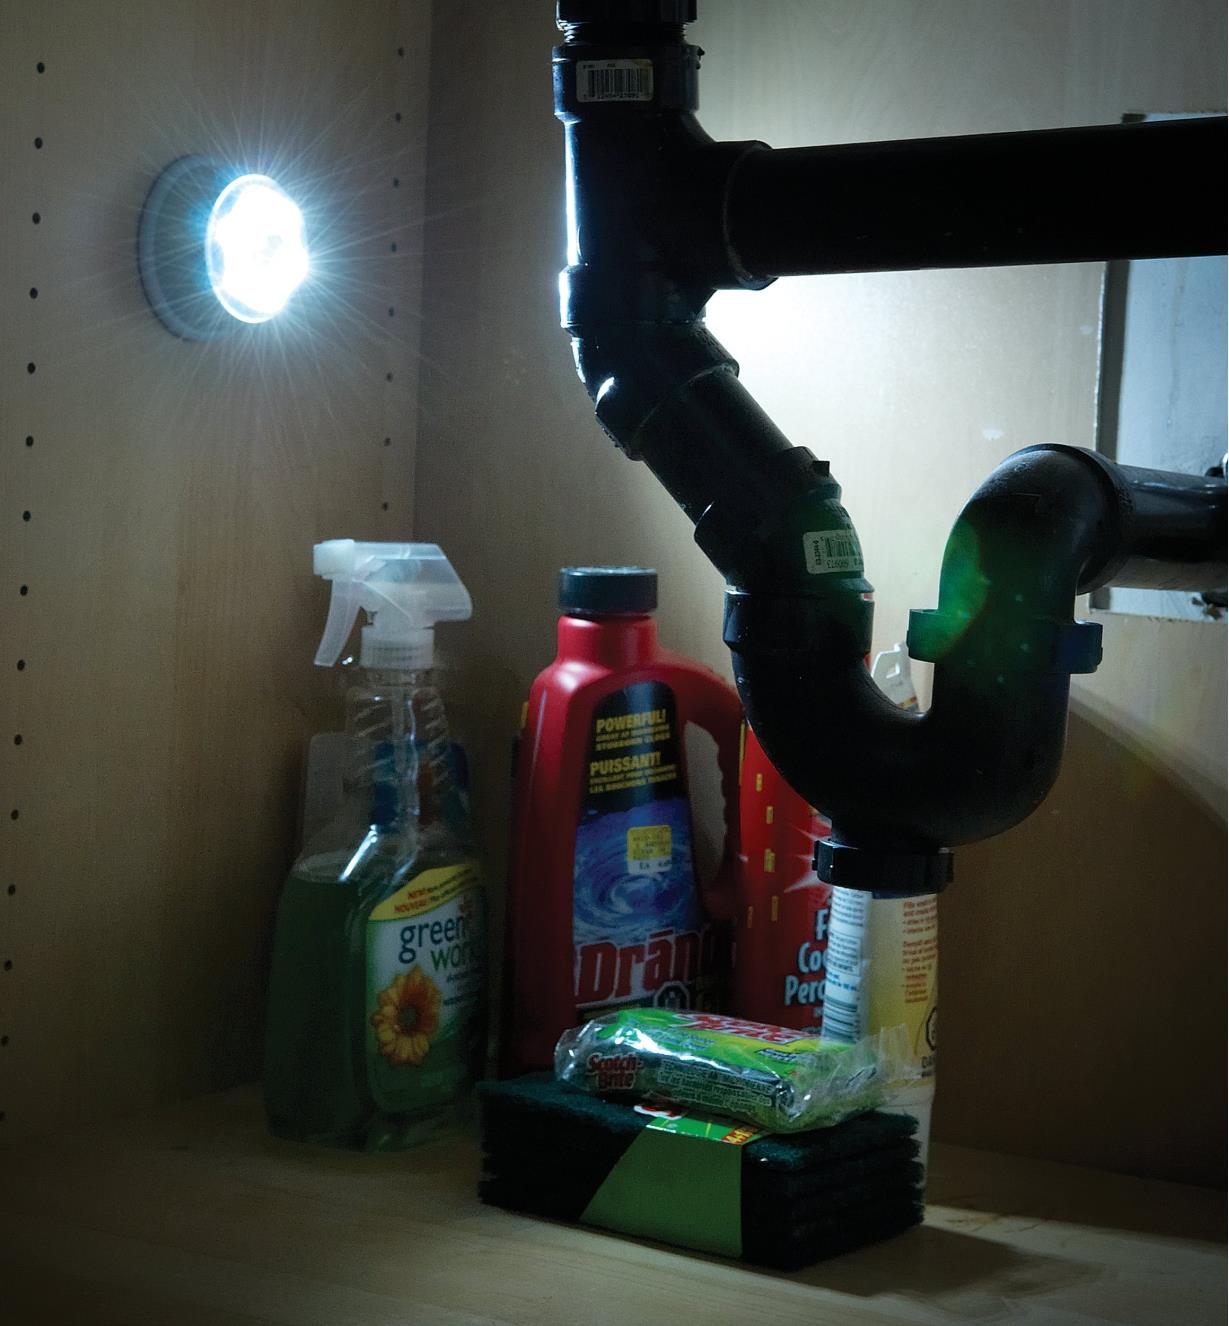 LED Infrared Detection Light mounted under a sink